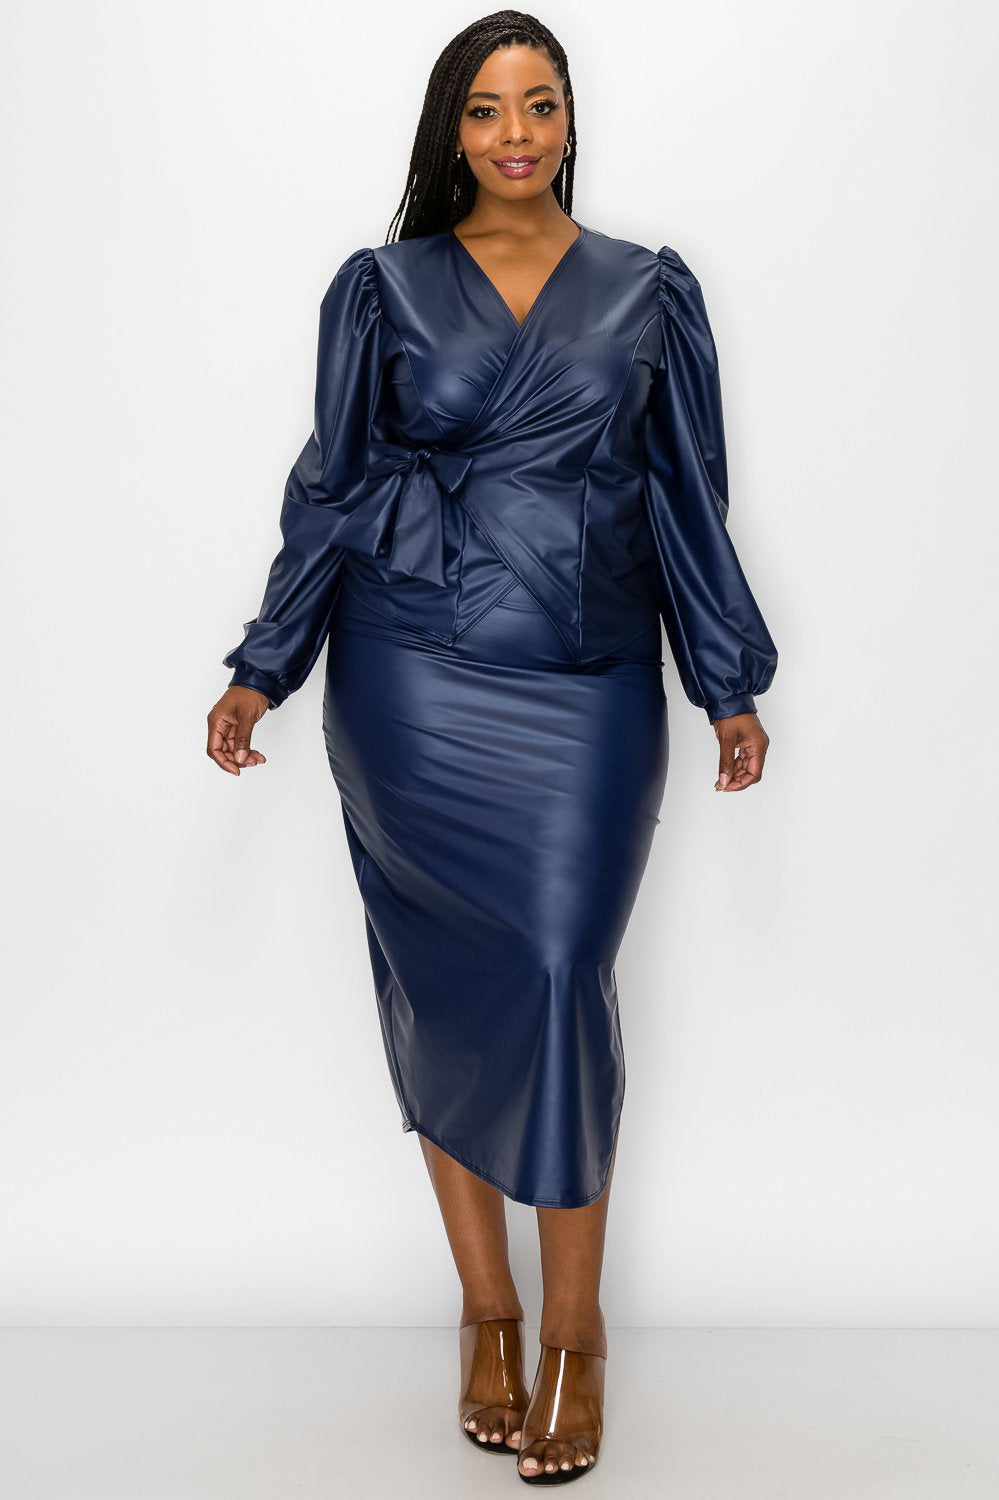 livd L I V D women's trendy plus size fashion made in USA contemporary faux leather peplum wrap top and slit midi skirt in navy